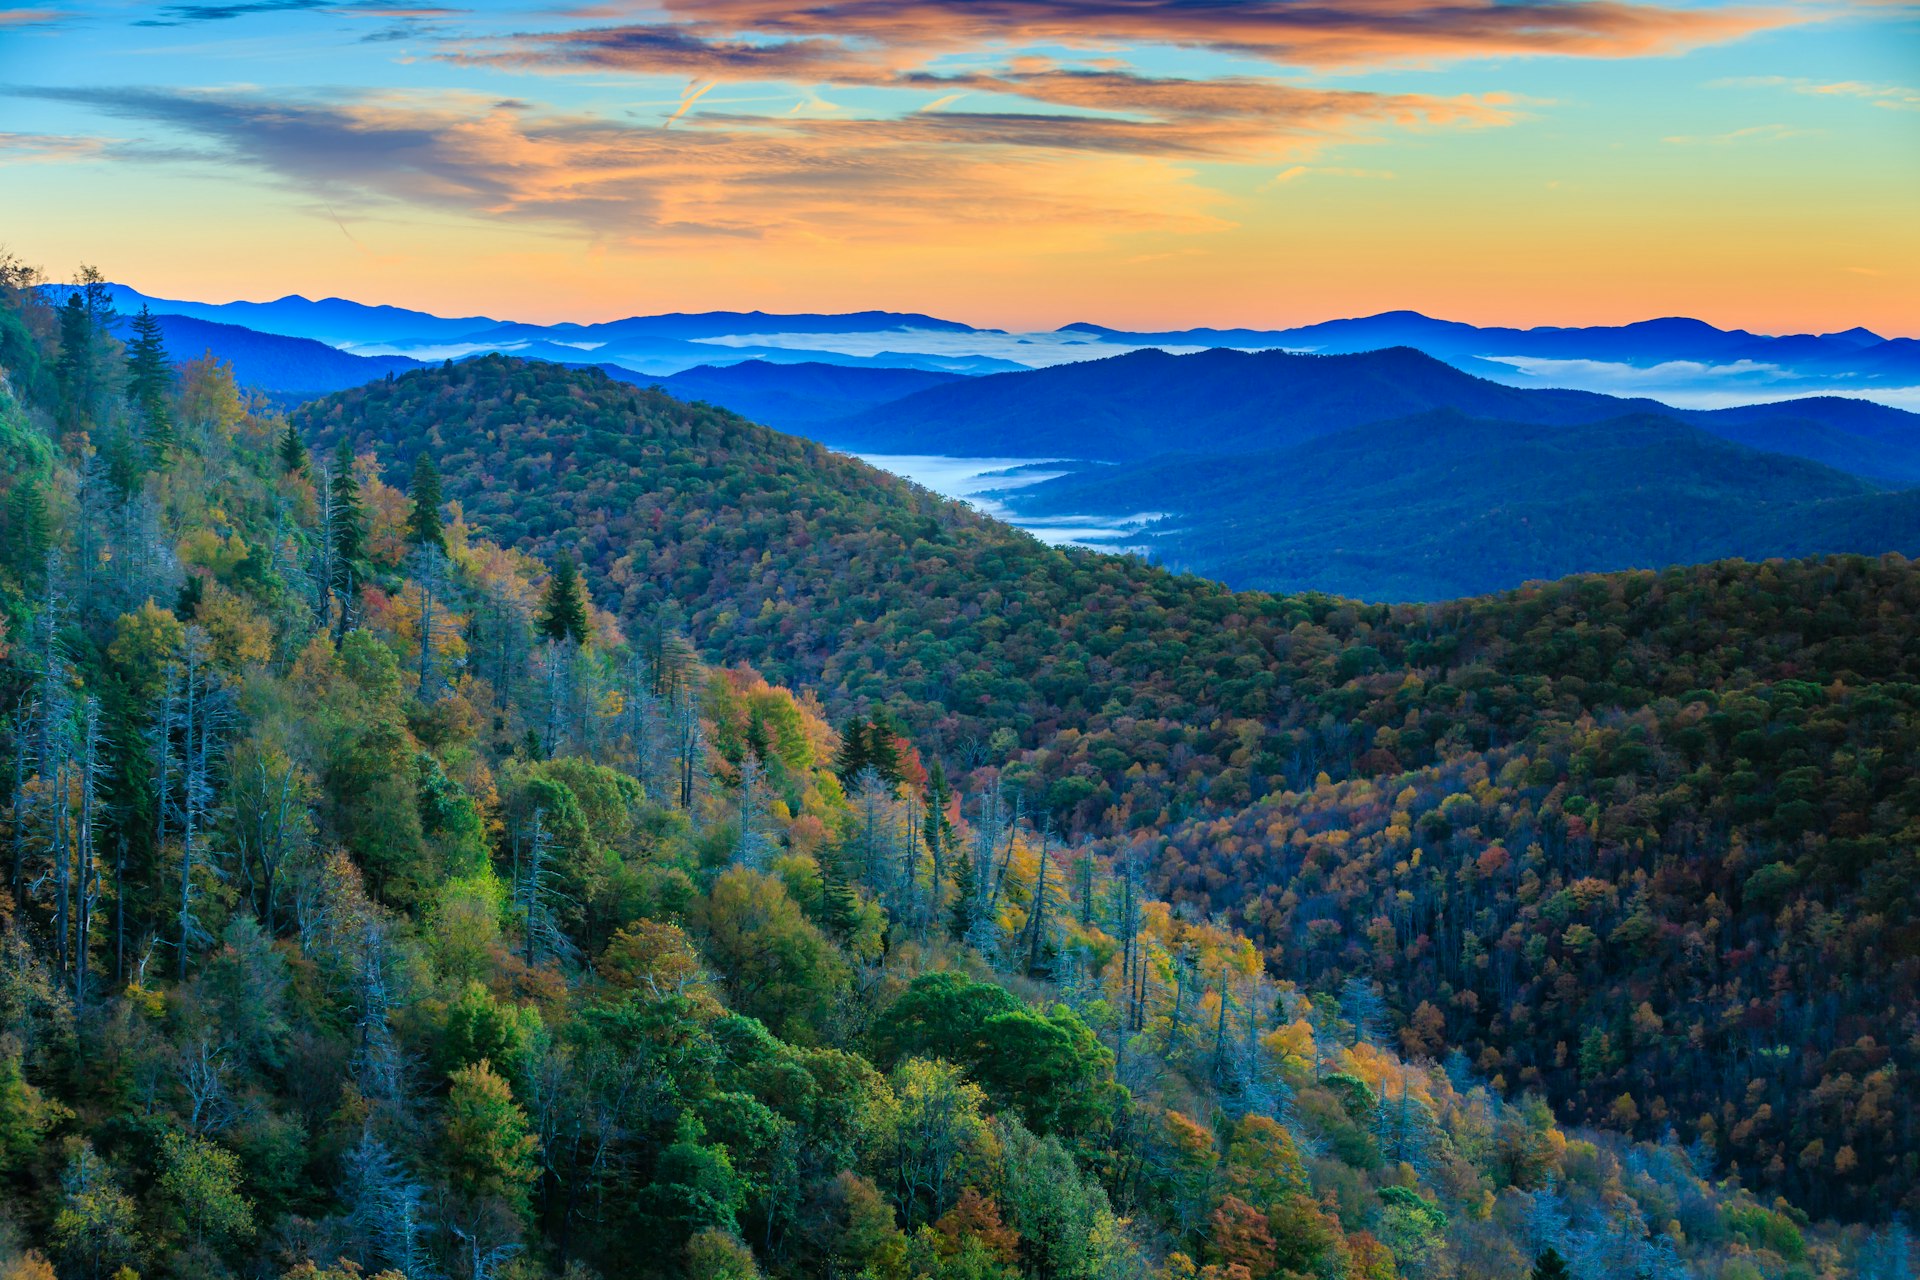 Autumn sunrise over the East Fork of the Pigeon River in the Blue Ridge mountains of Western North Carolina